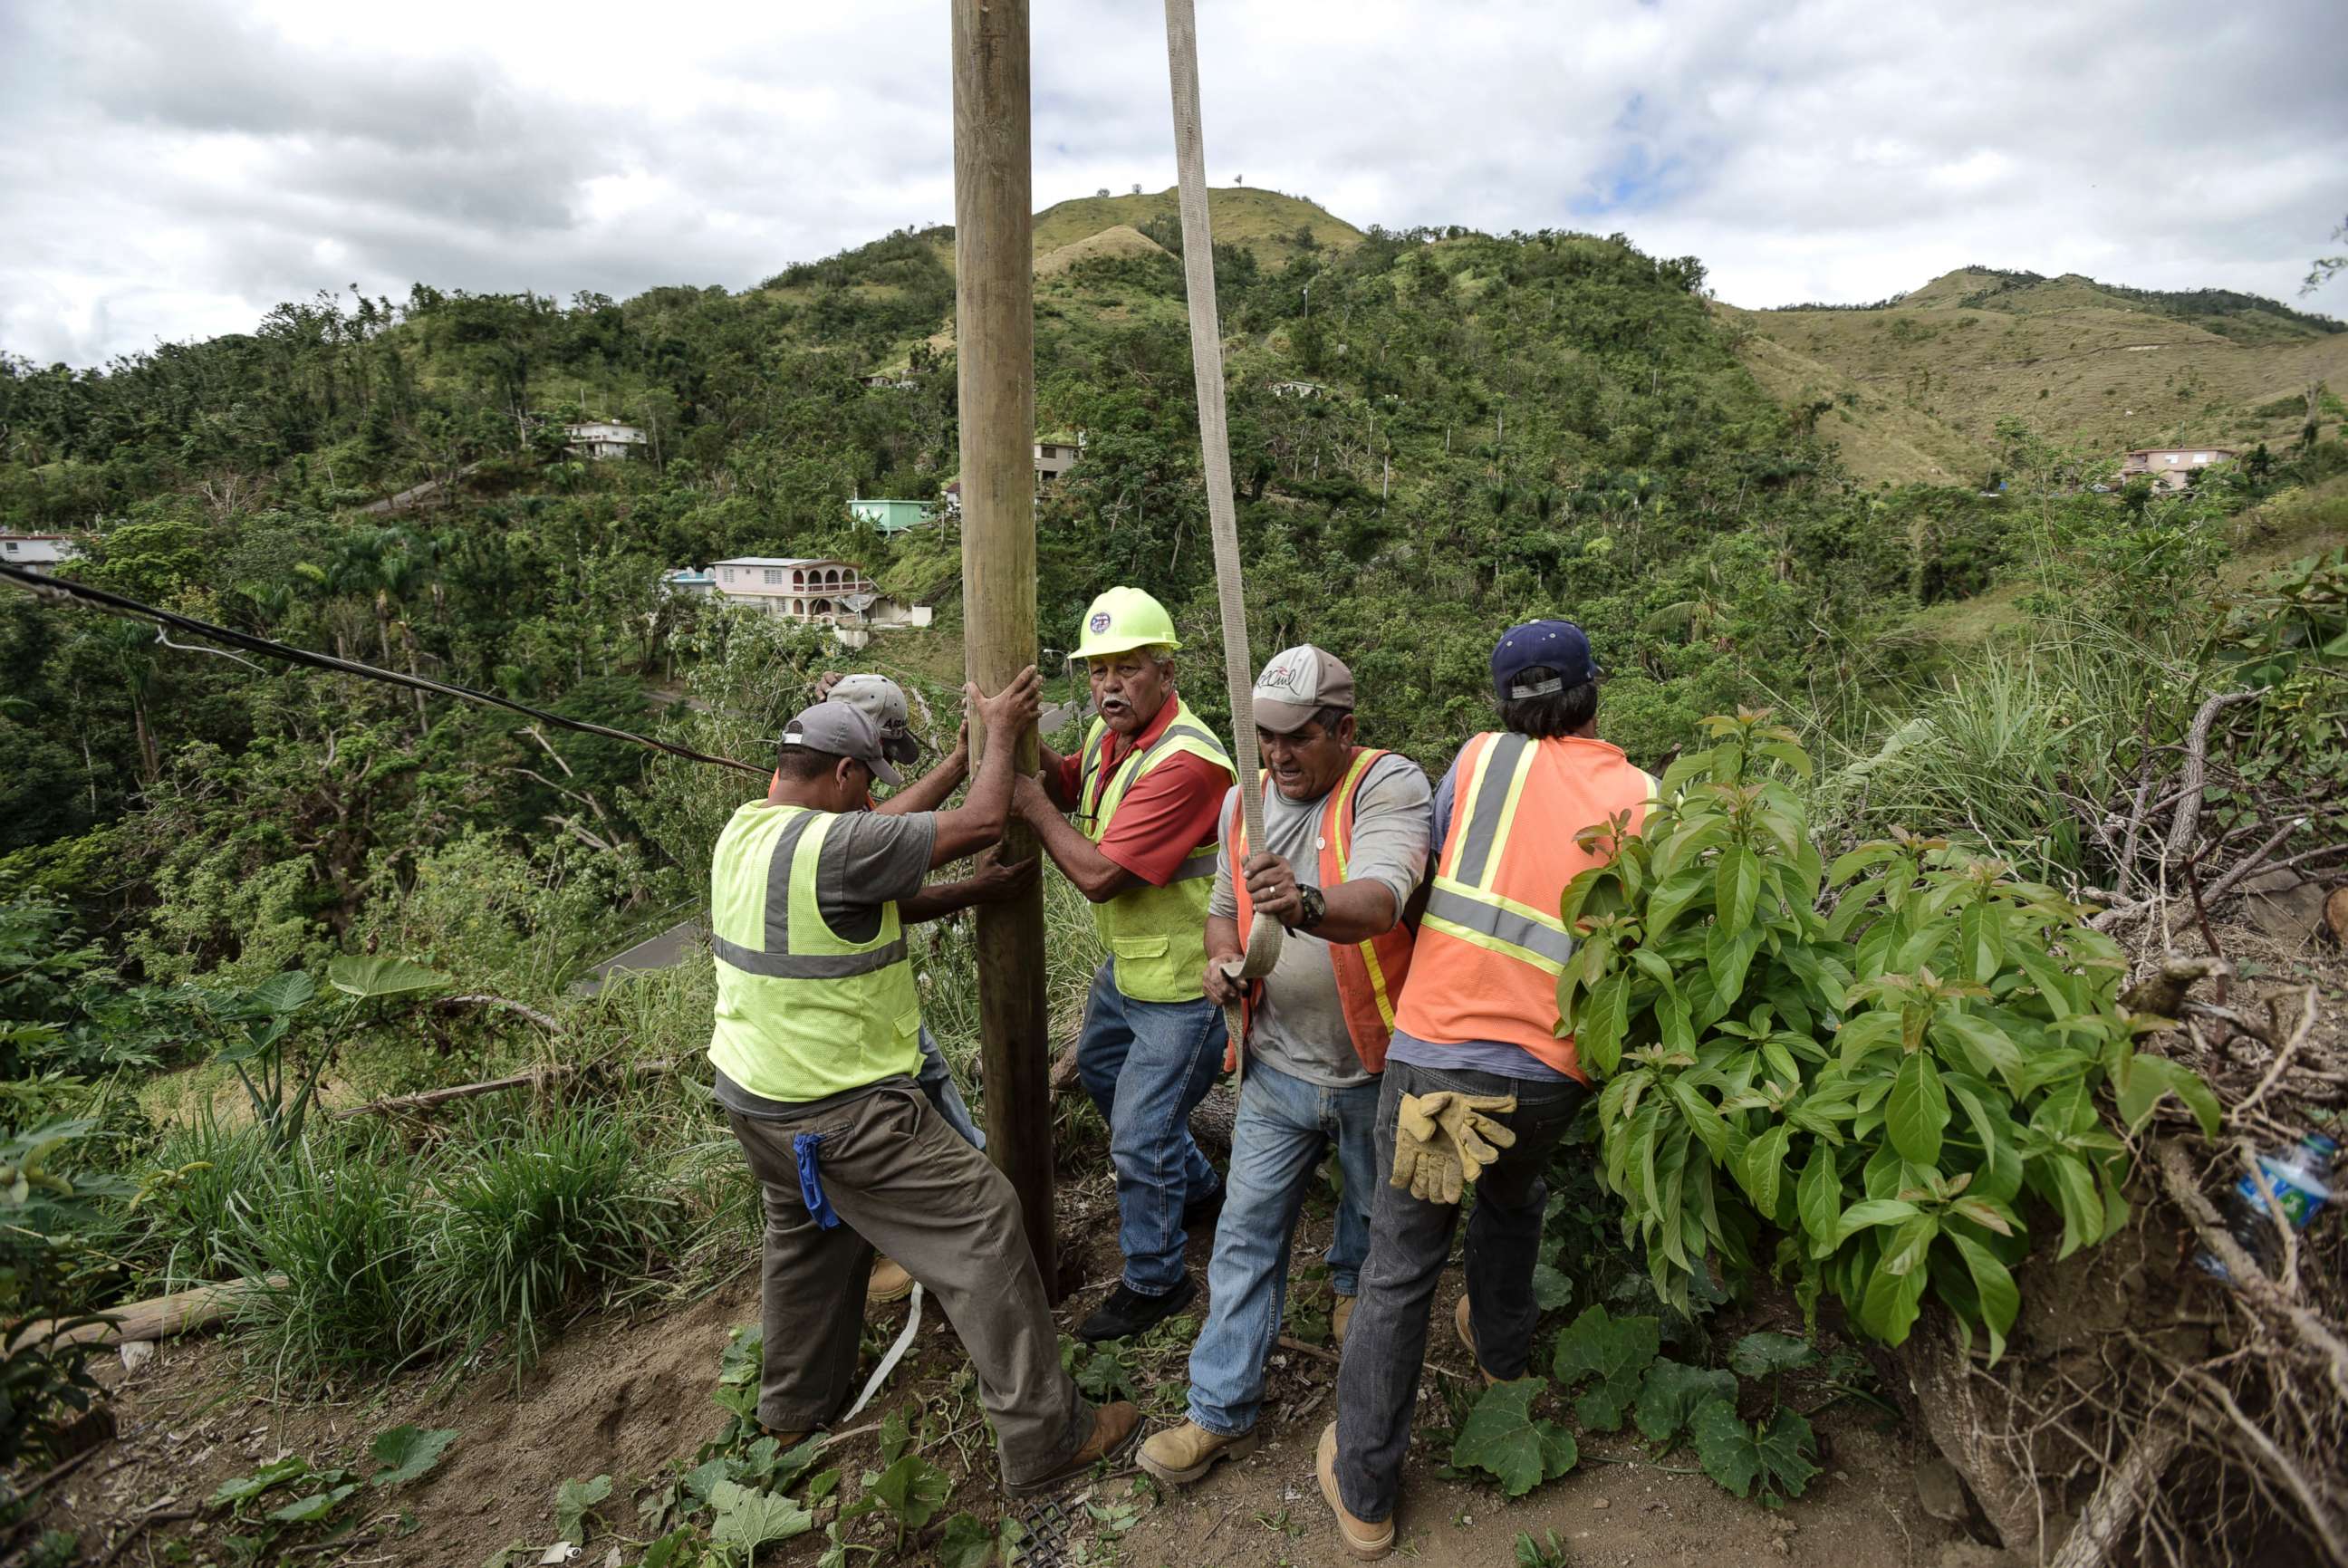 PHOTO: Public Works Sub-Director Ramon Mendez, wearing hard hat, directs locals who are municipal workers, as they install a power pole in an effort to return electricity to a home, in Coamo, Puerto Rico, Jan. 31, 2018.